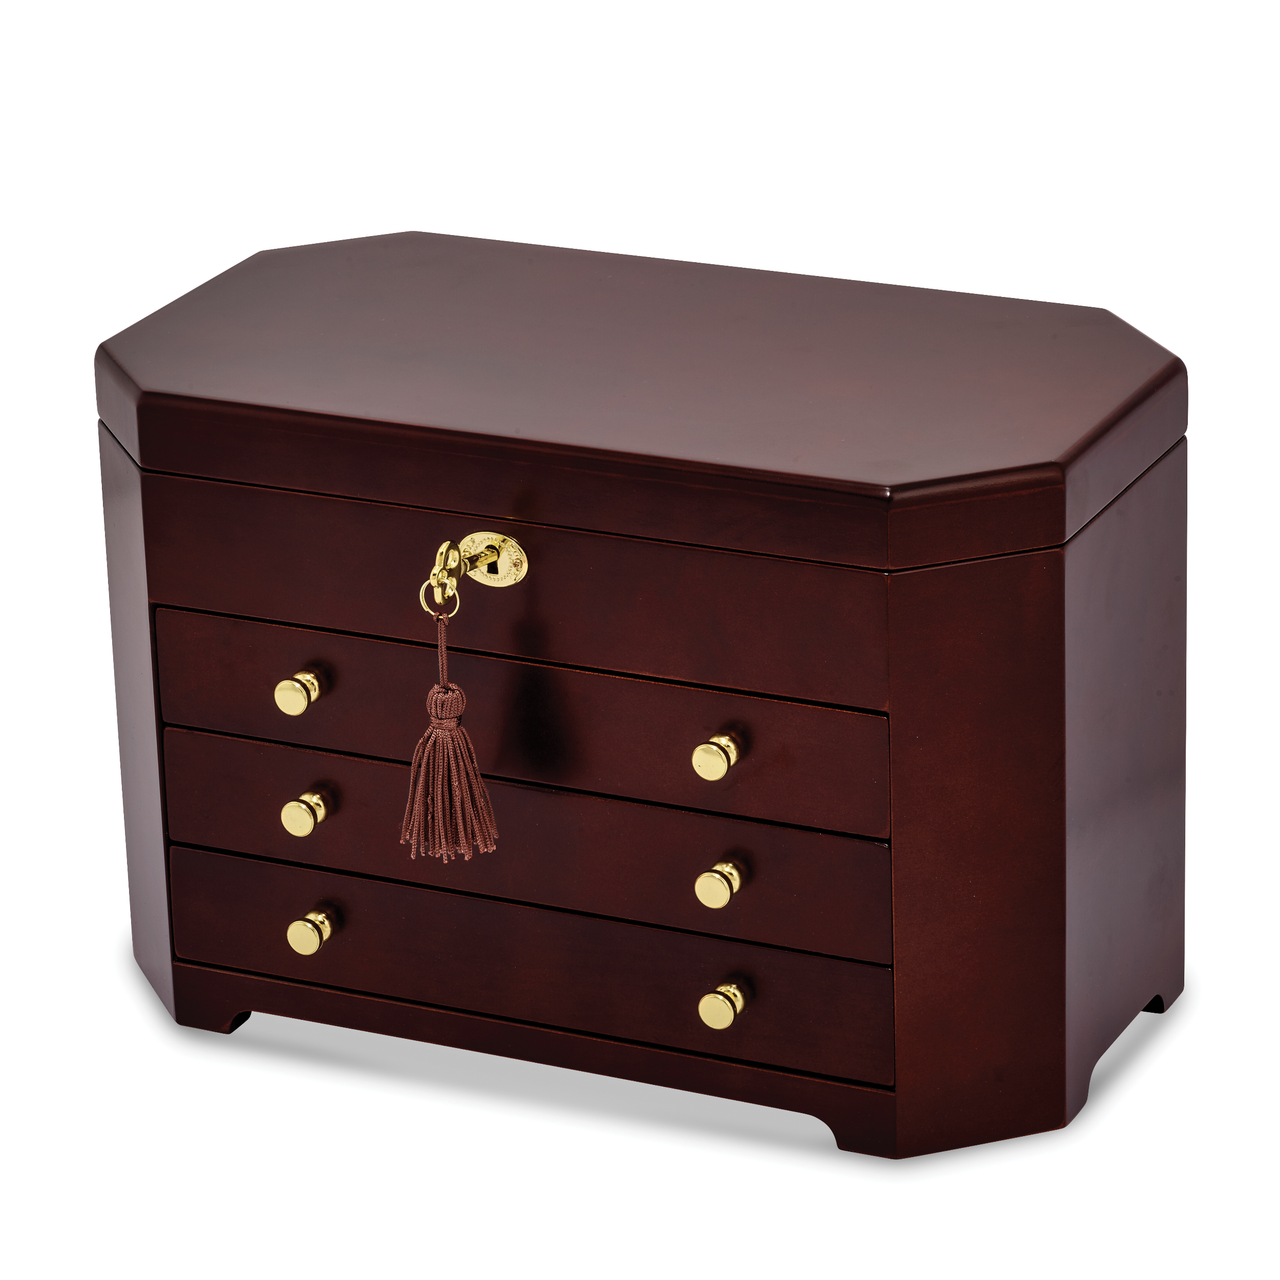 Matte Mahogany Veneer with 3 Drawers Jewelry Box by Jere